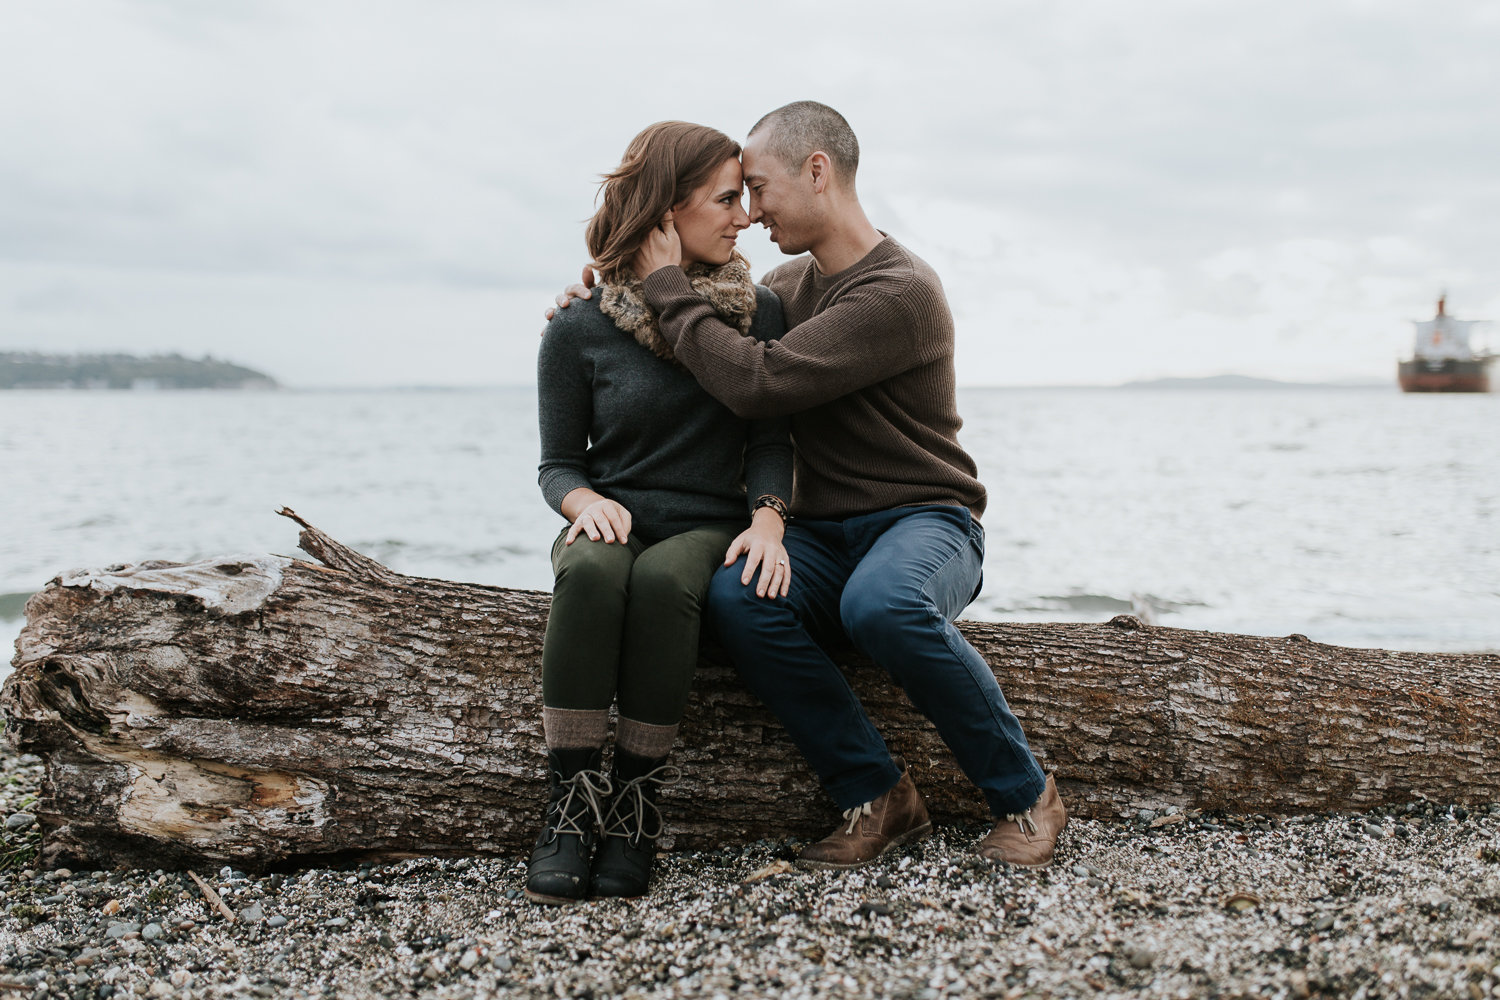 Gorgeous couple on a Seattle beach at sunset with overcast skies.